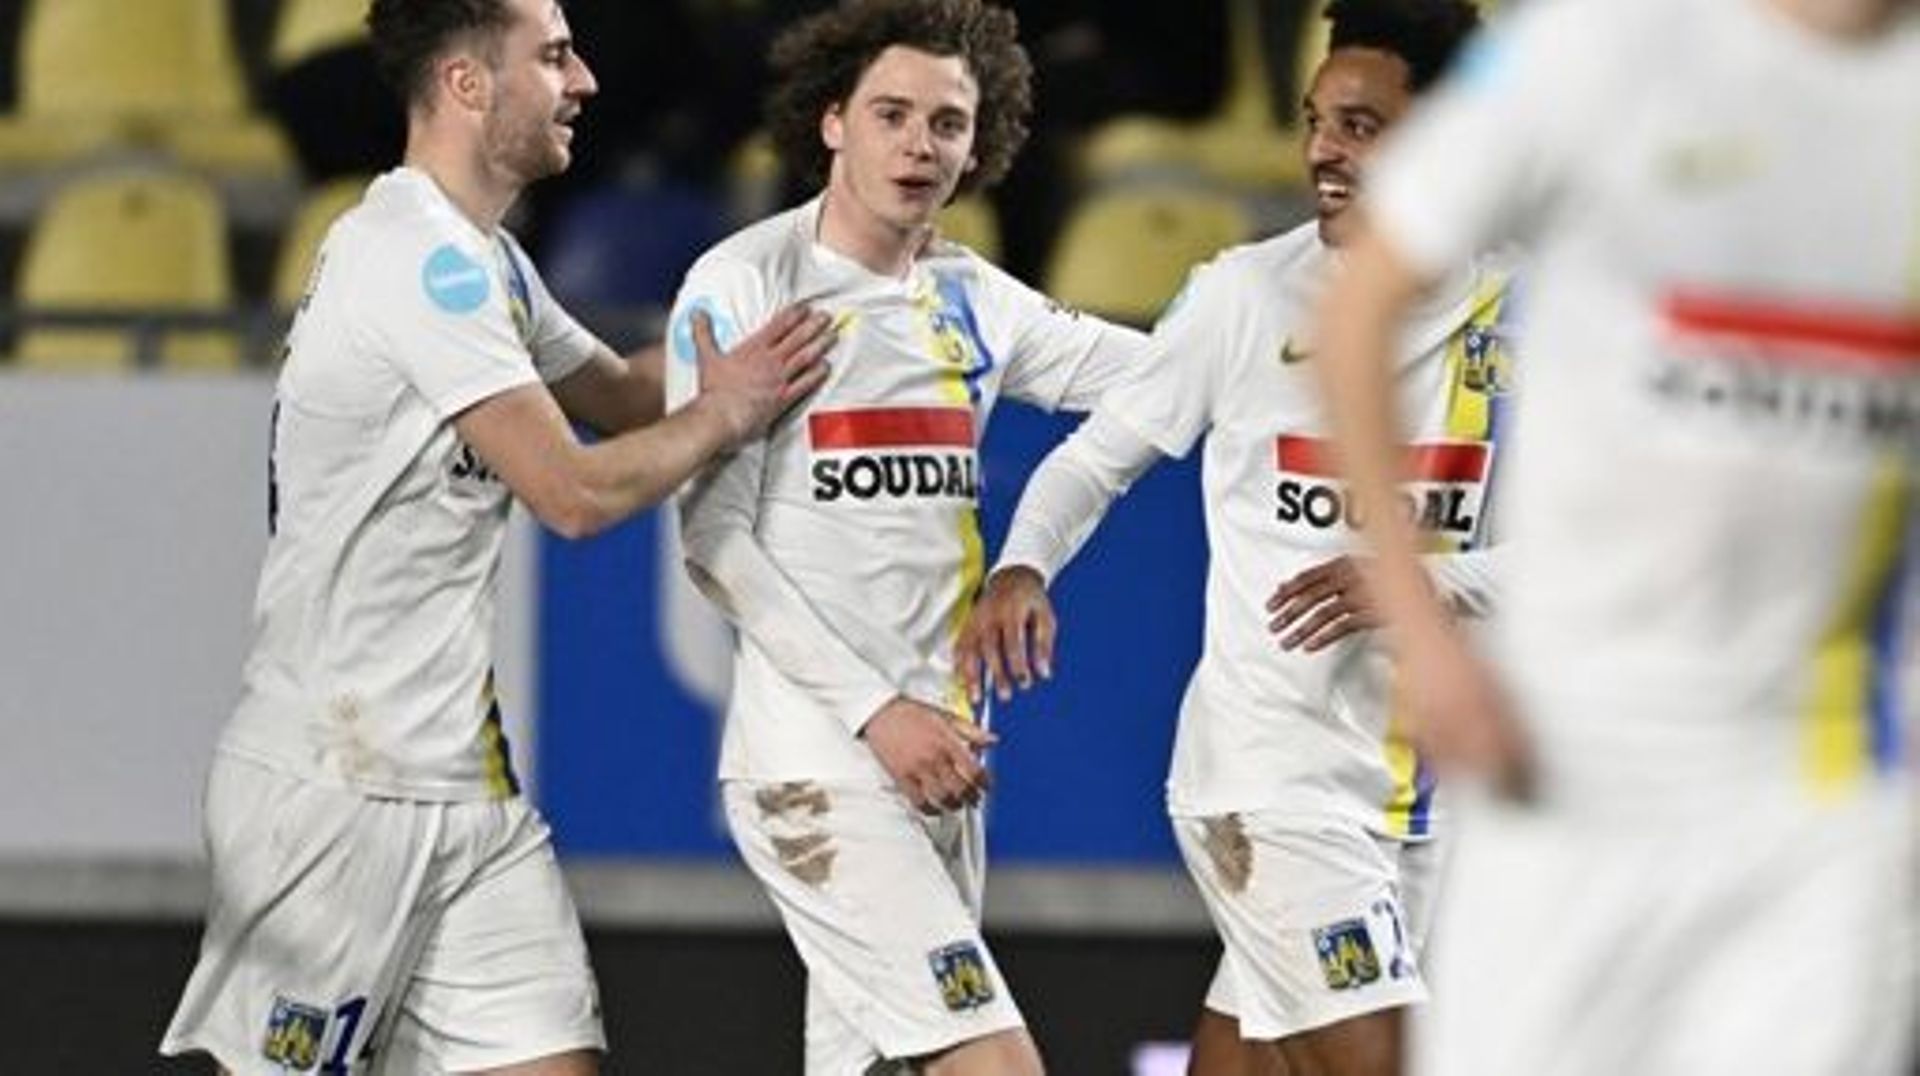 Westerlo’s Kyan Vaesen, Westerlo’s Maxim De Cuyper and Westerlo’s Bryan Reynolds celebrate after scoring during a soccer match between Sint-Truidense VV and KVC Westerlo, Sunday 19 February 2023 in Sint-Truiden, on day 26 of the 2022-2023 'Jupiler Pro Lea